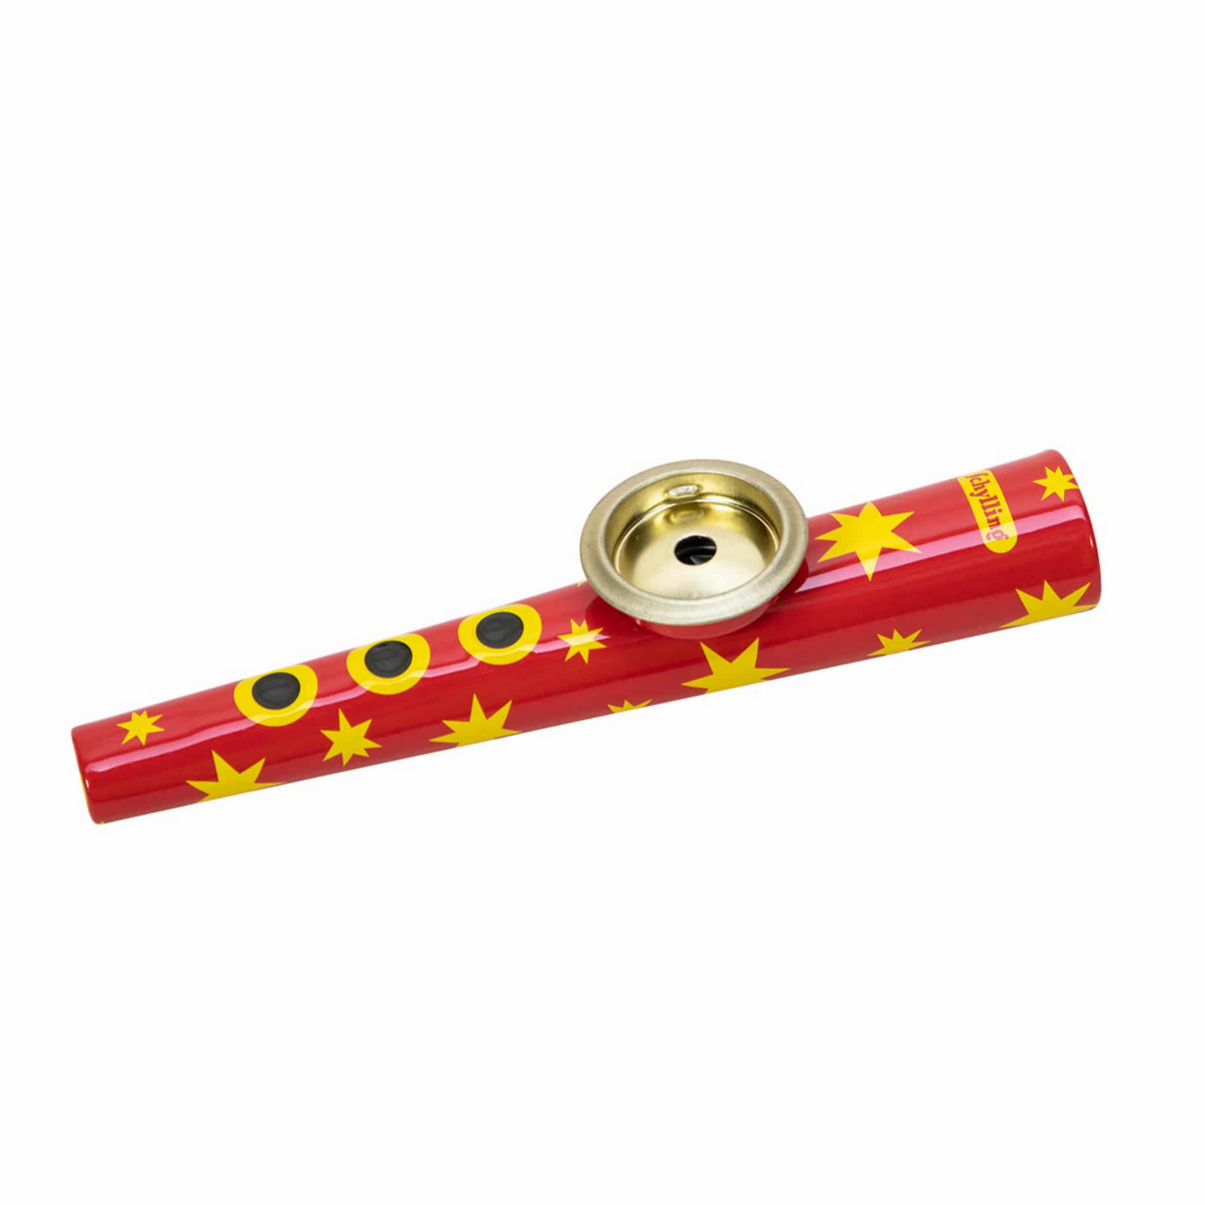 red kazoo featuring yellow stars